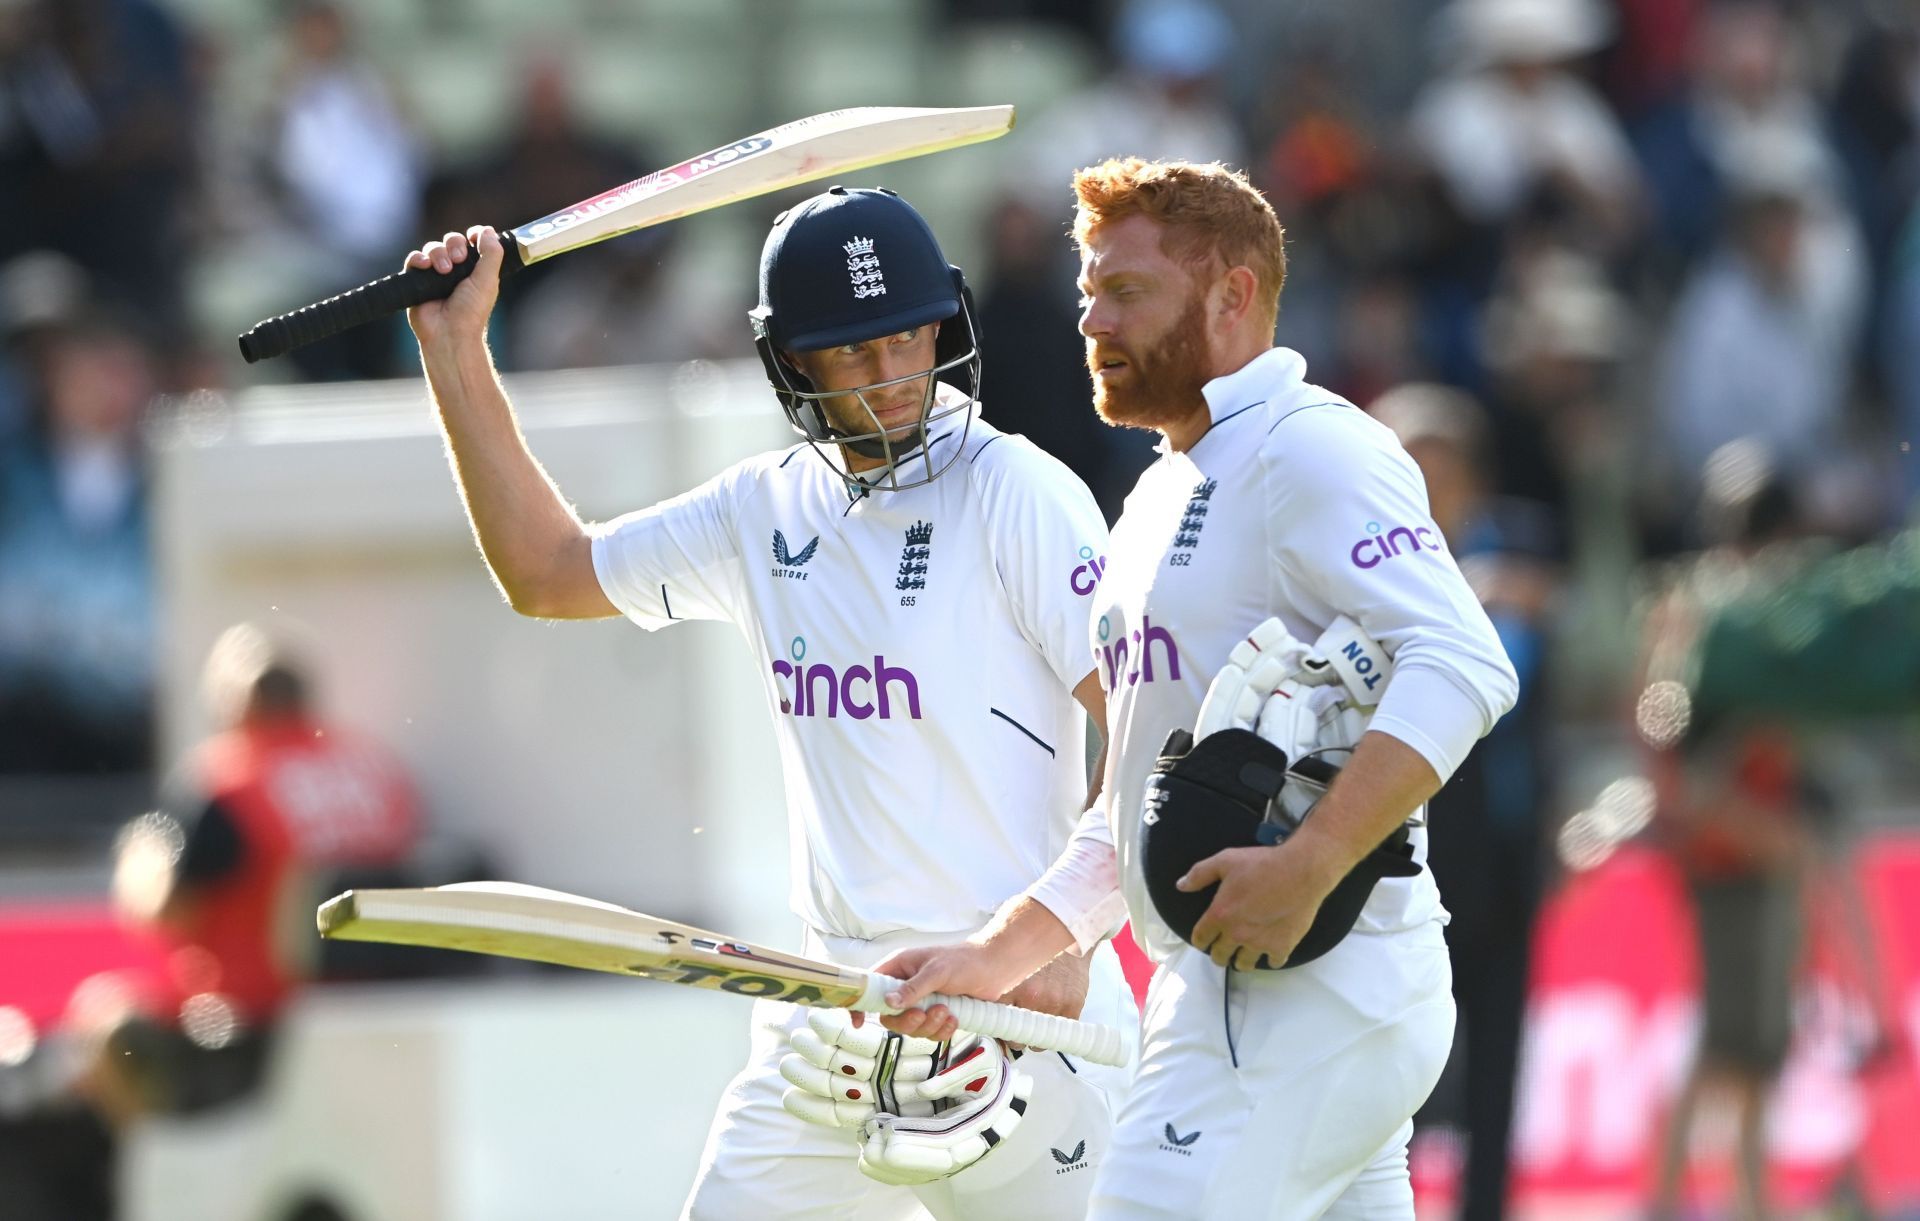 Jonny Bairstow (right) and Joe Root acknowledge the applause as they leave the field after Day 4 in Birmingham. Pic: Getty Images